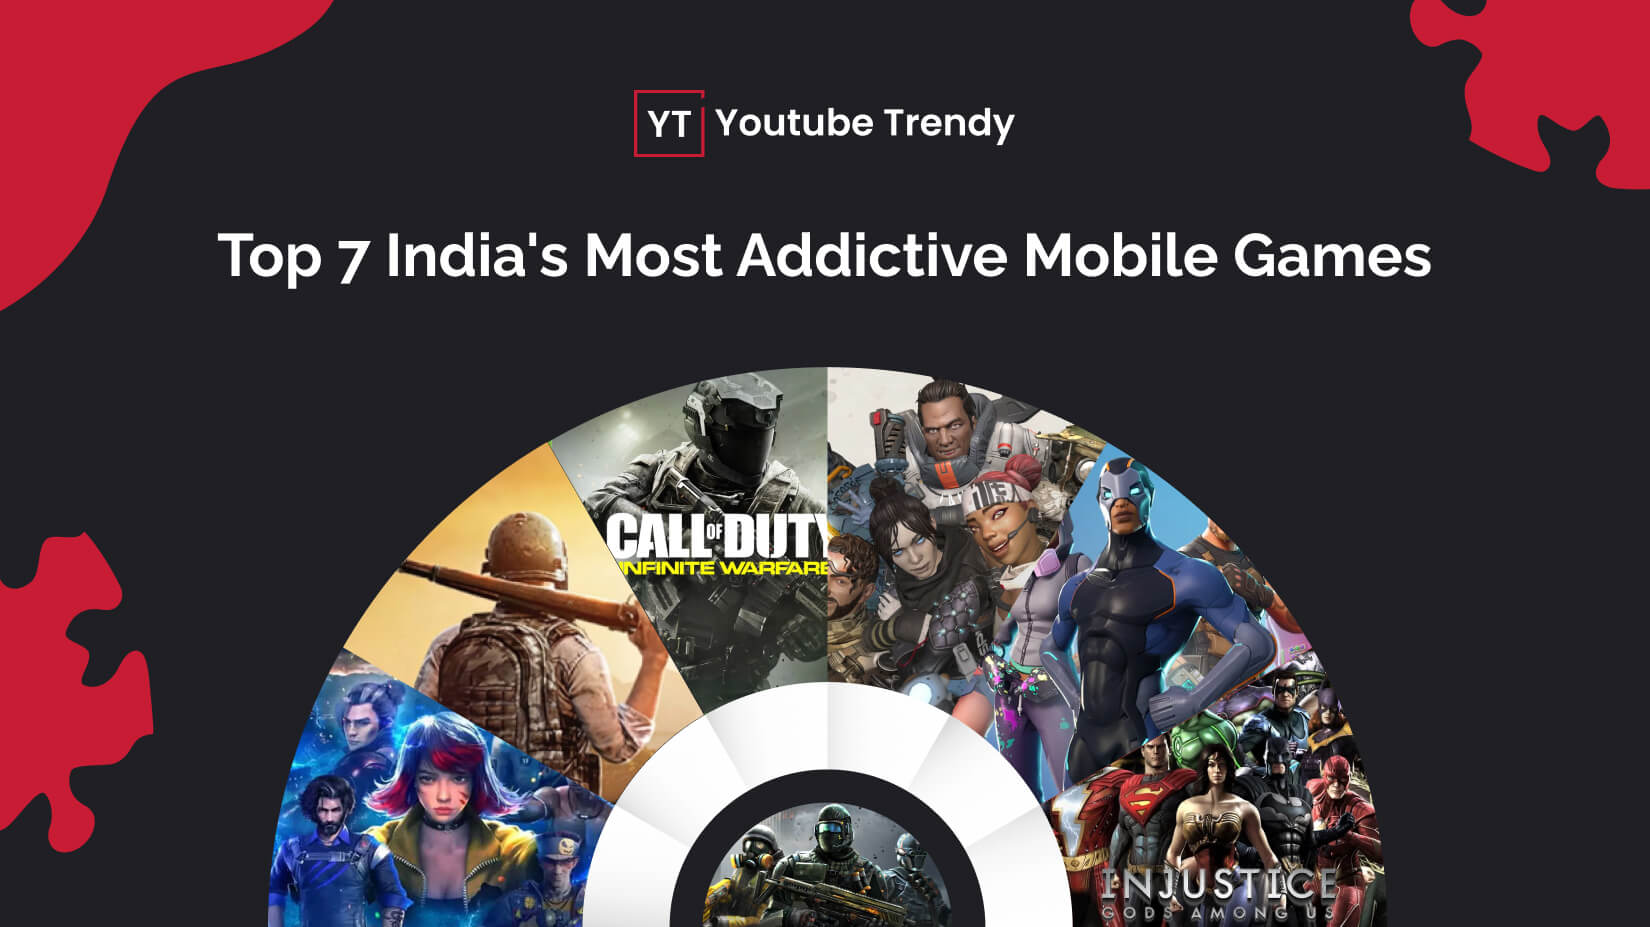 Top 7 India’s Most Addictive Mobile Games